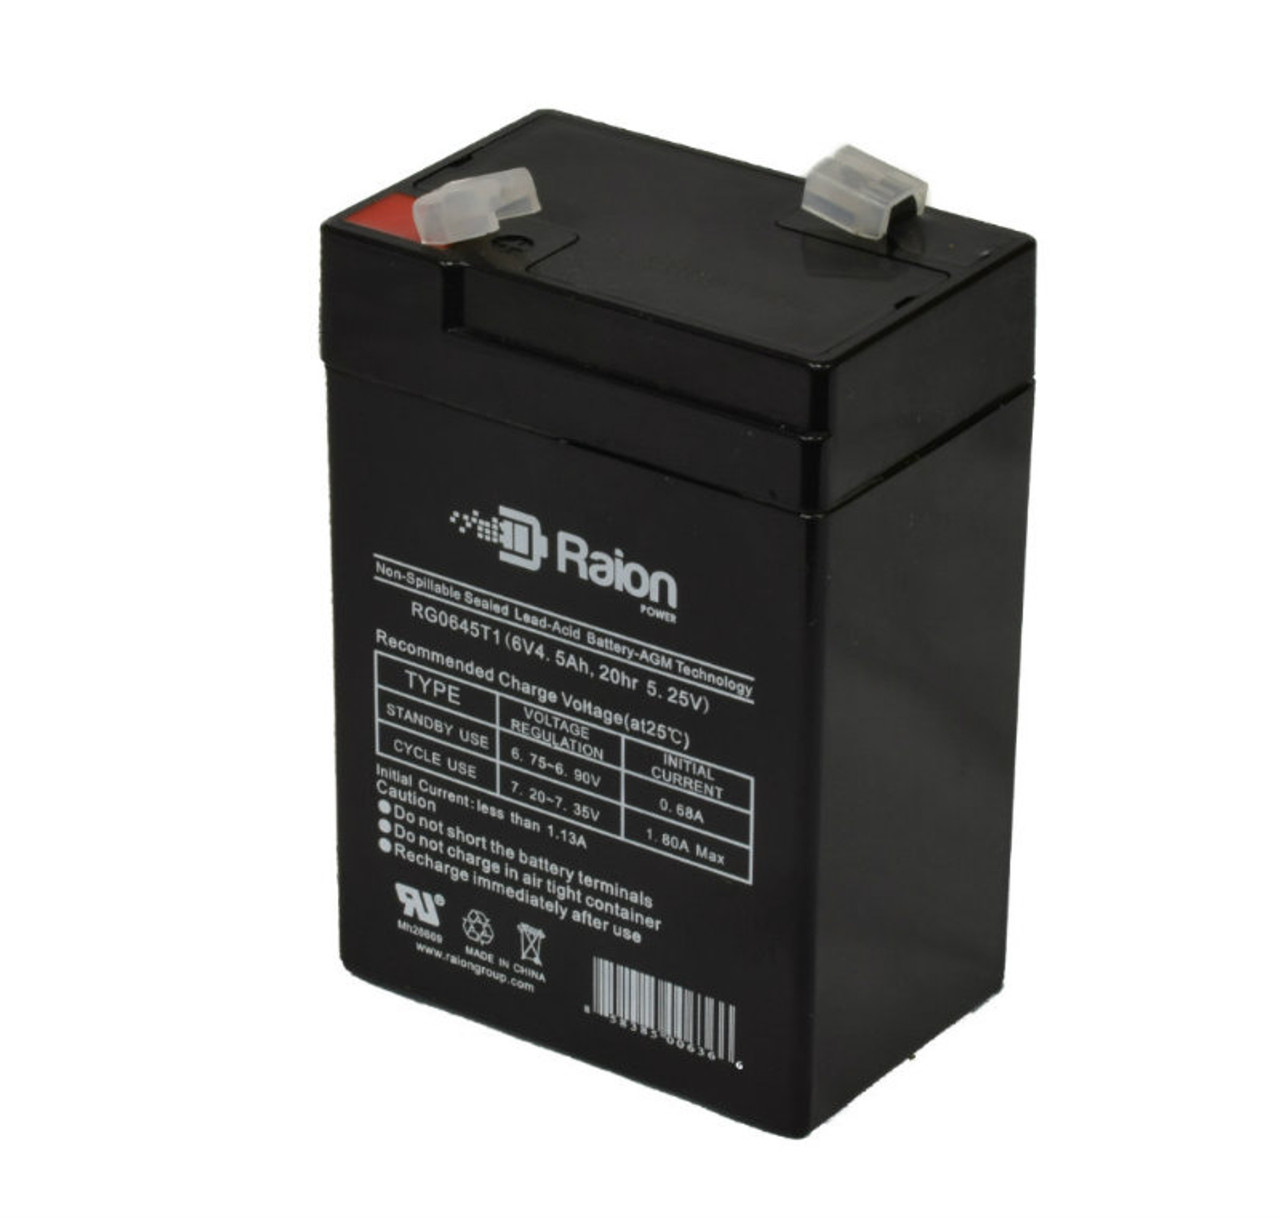 Raion Power RG0645T1 6V 4.5Ah Replacement Battery Cartridge for Mighty Max ML4-6